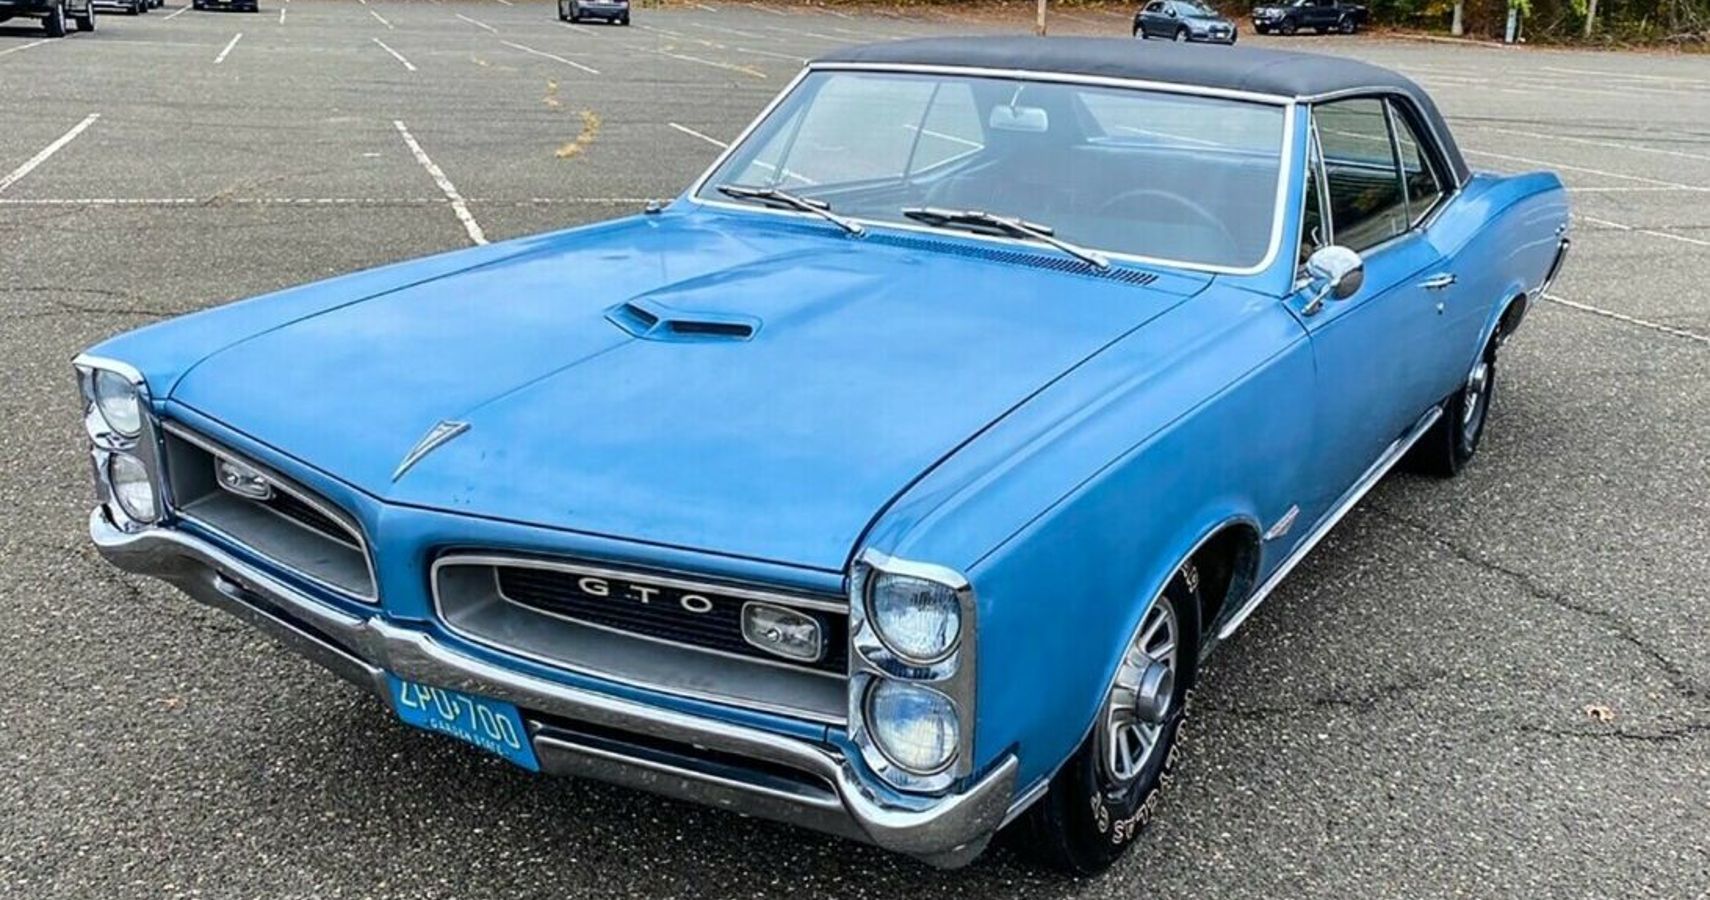 1966 Fontaine Blue Pontiac GTO front side view